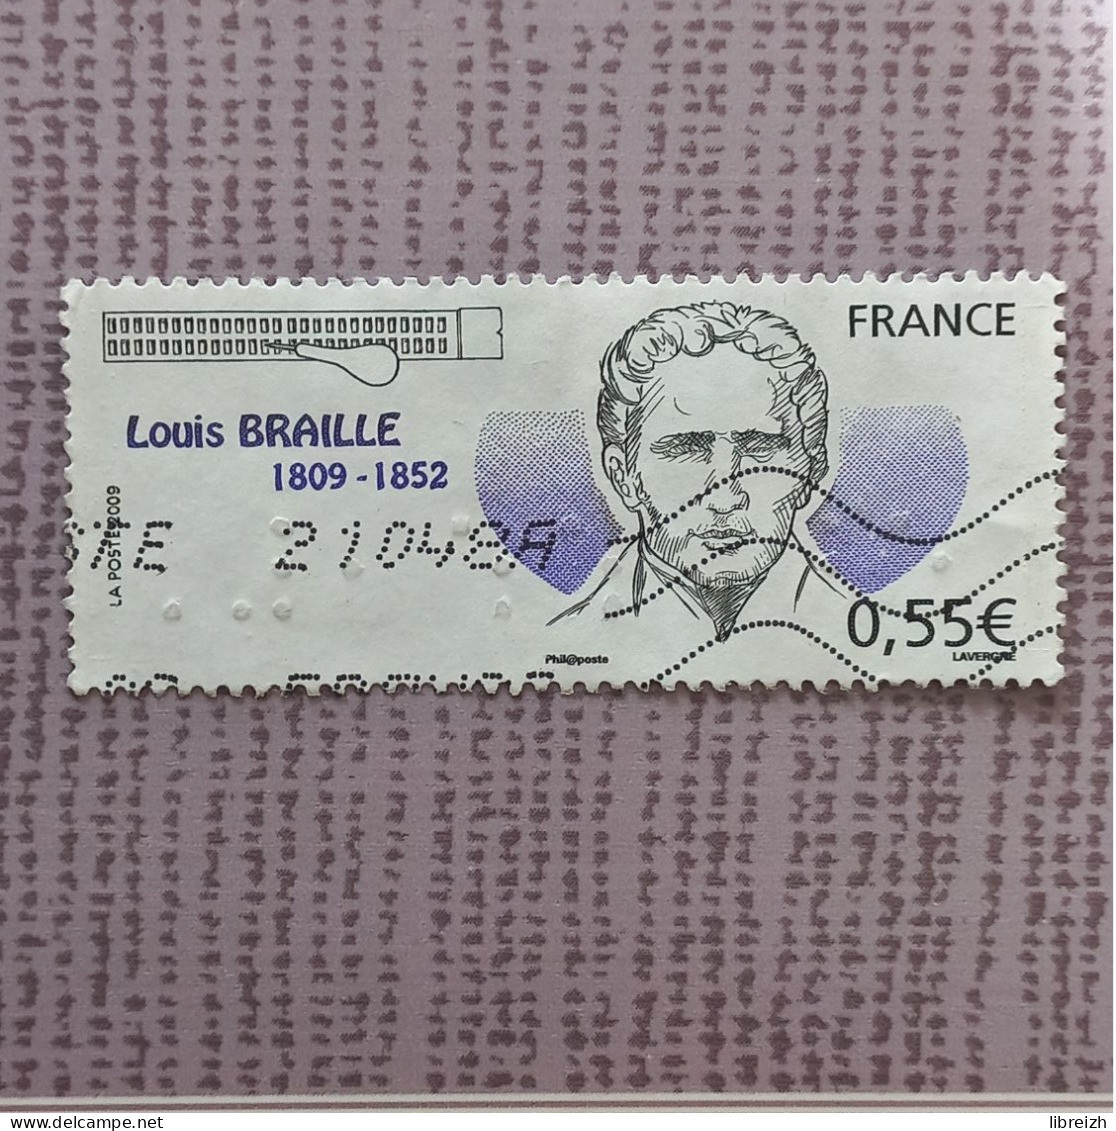 Louis Braille   N° 4324 Année 2009 - Used Stamps